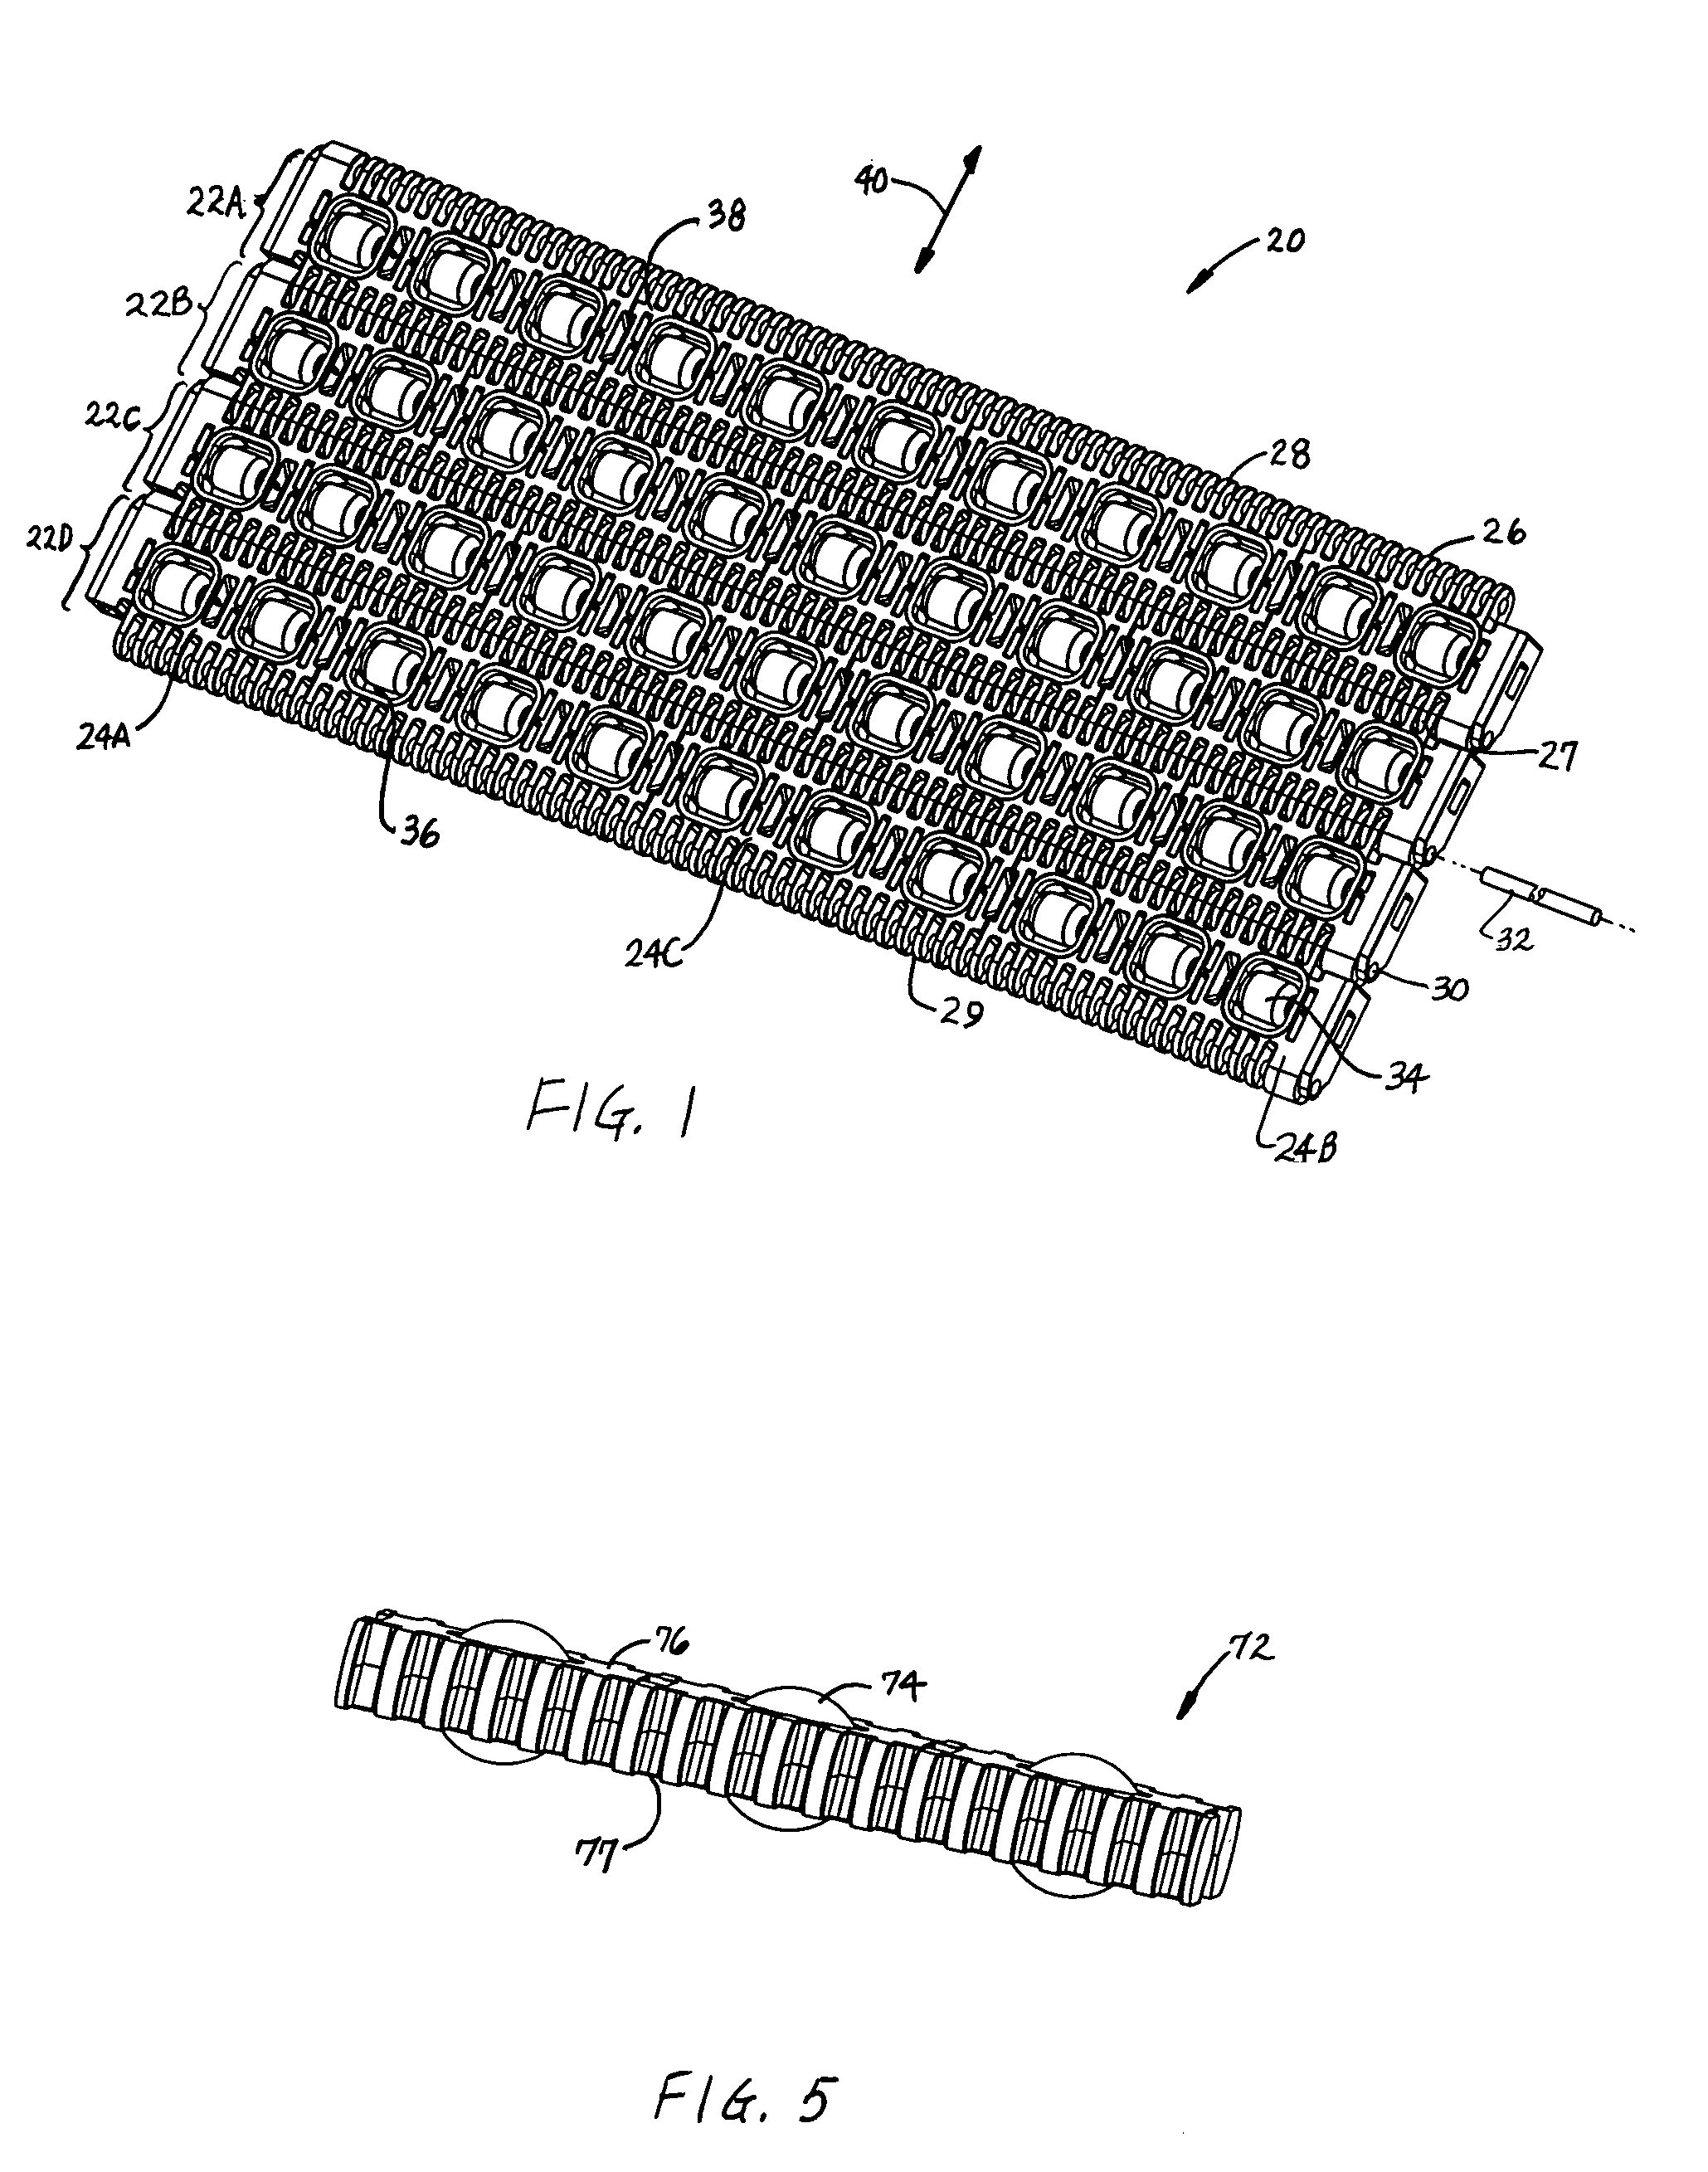 Conveyor belt modules with embedded rollers retained in the modules and associated method